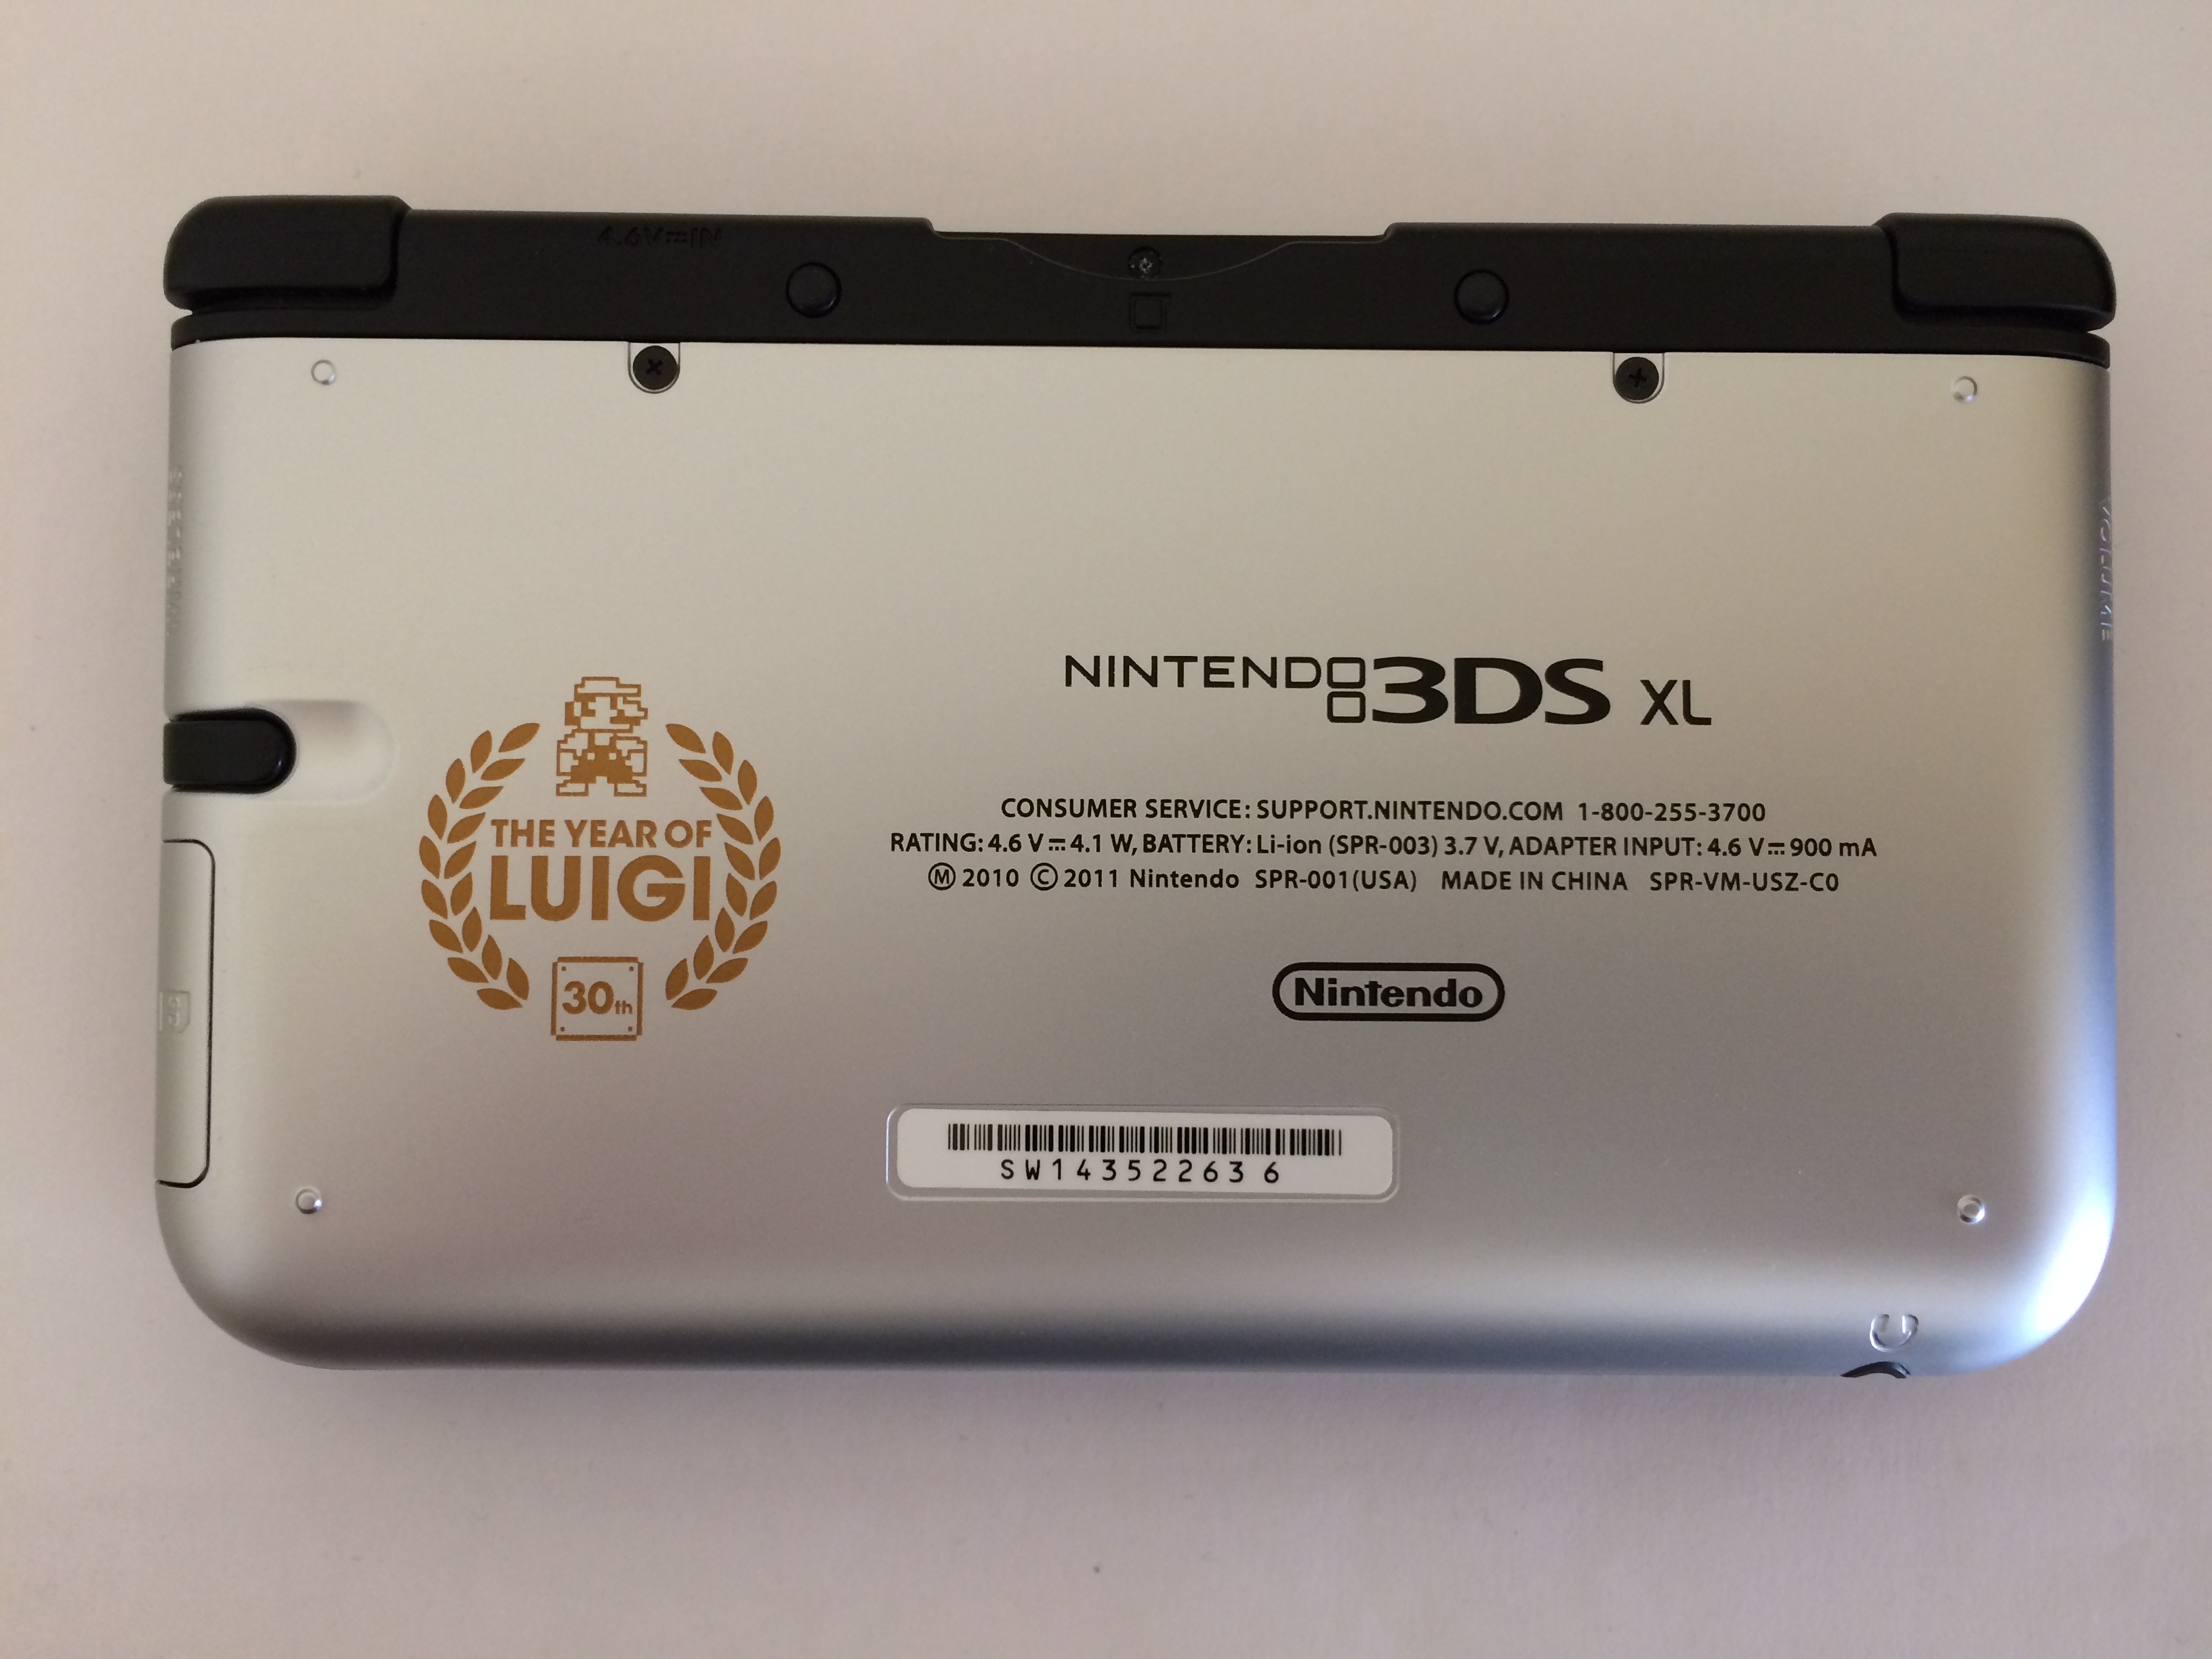 liver pull the wool over eyes Comorama FS][US] - Nintendo 3DS XL Mario & Luigi Limited Edition WIth HORI Case |  TechPowerUp Forums